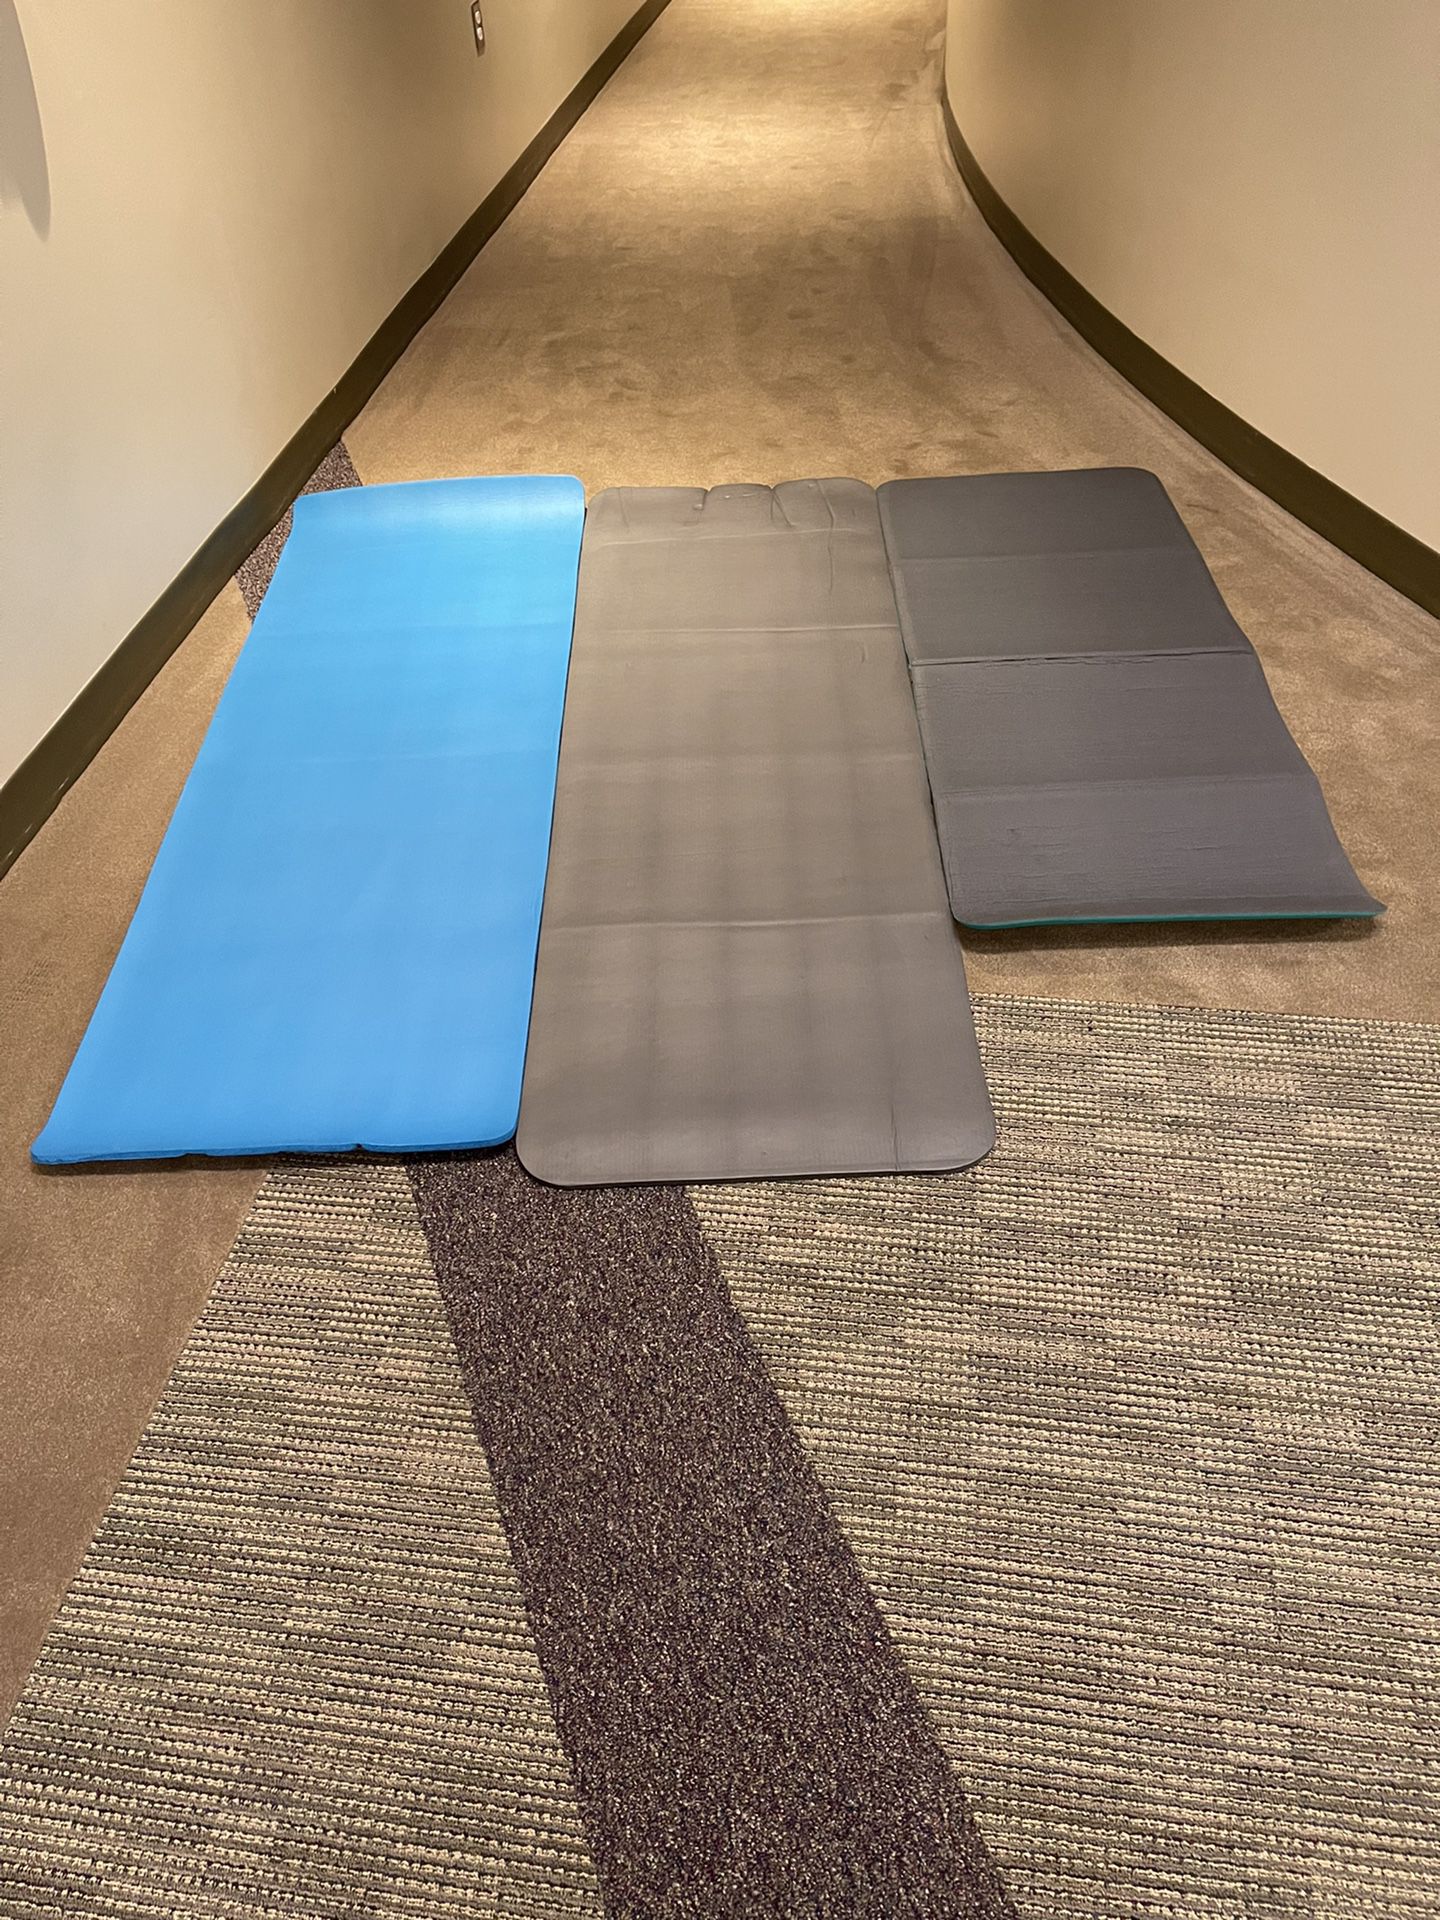 THREE (3) LARGE, THICK EXERCISE / WORKOUT / YOGA MATS - price for ALL THREE (3) TOGETHER is firm